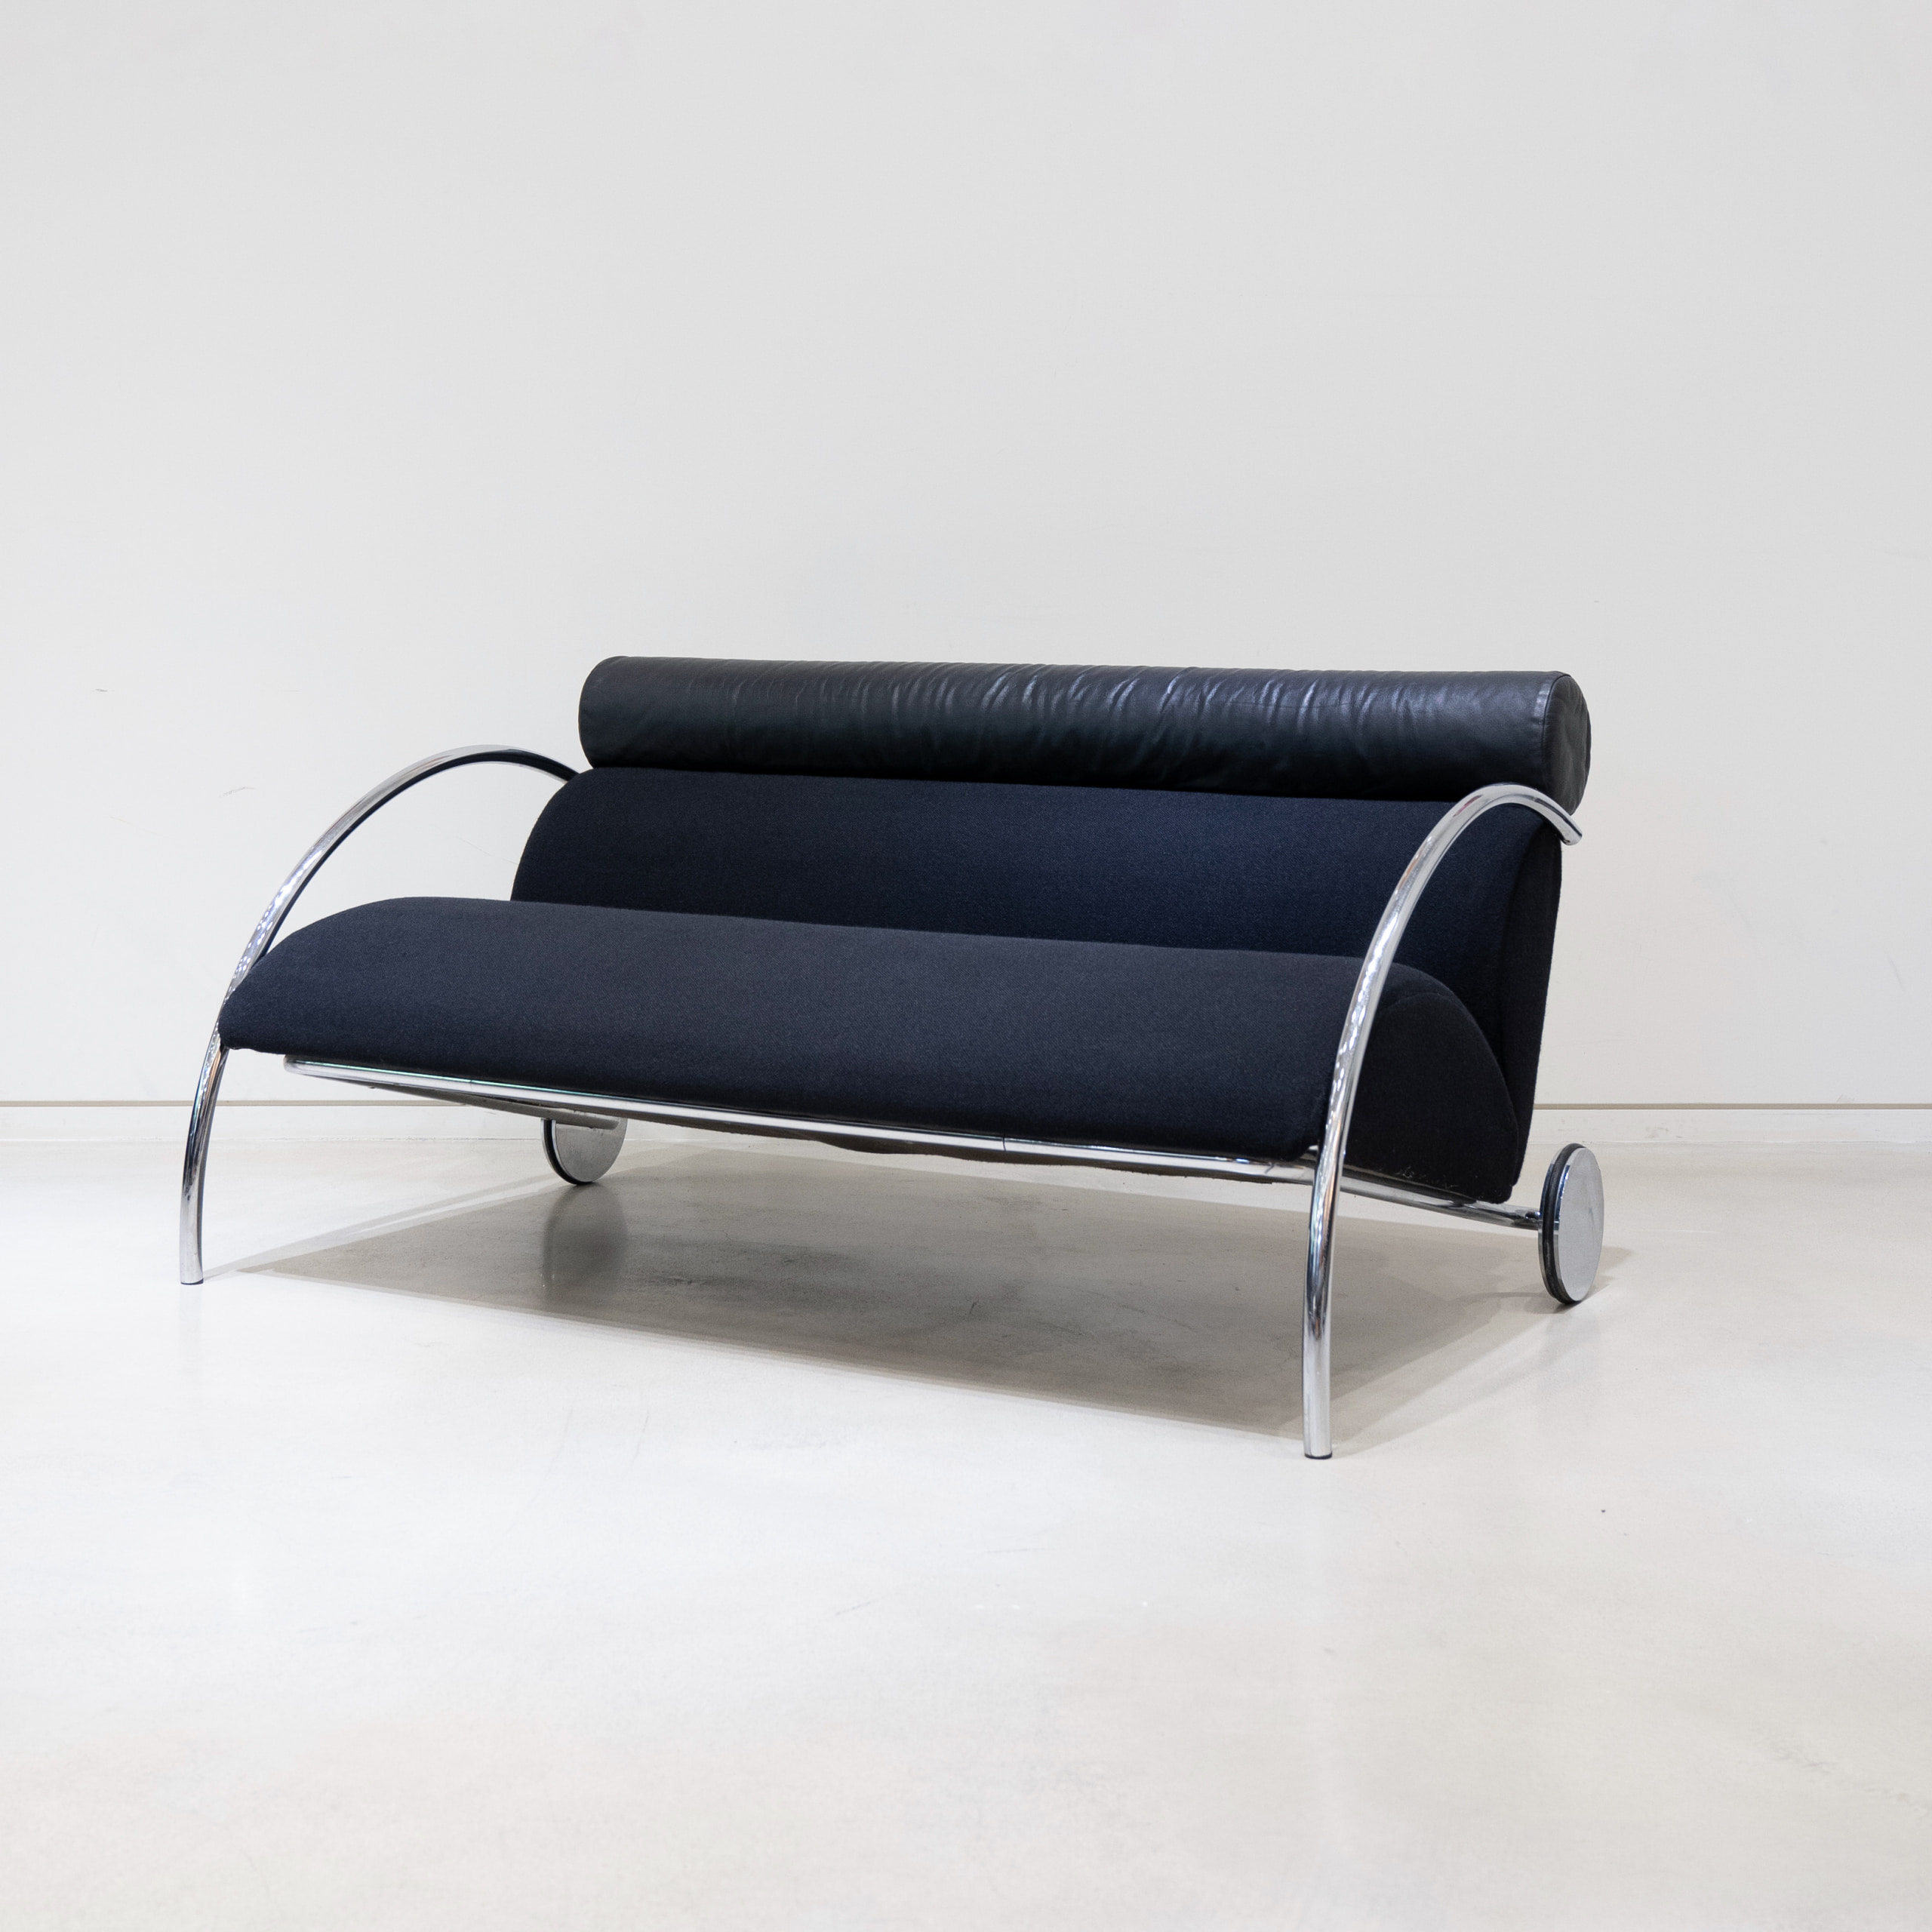 Zyklus Sofa by Peter Maly